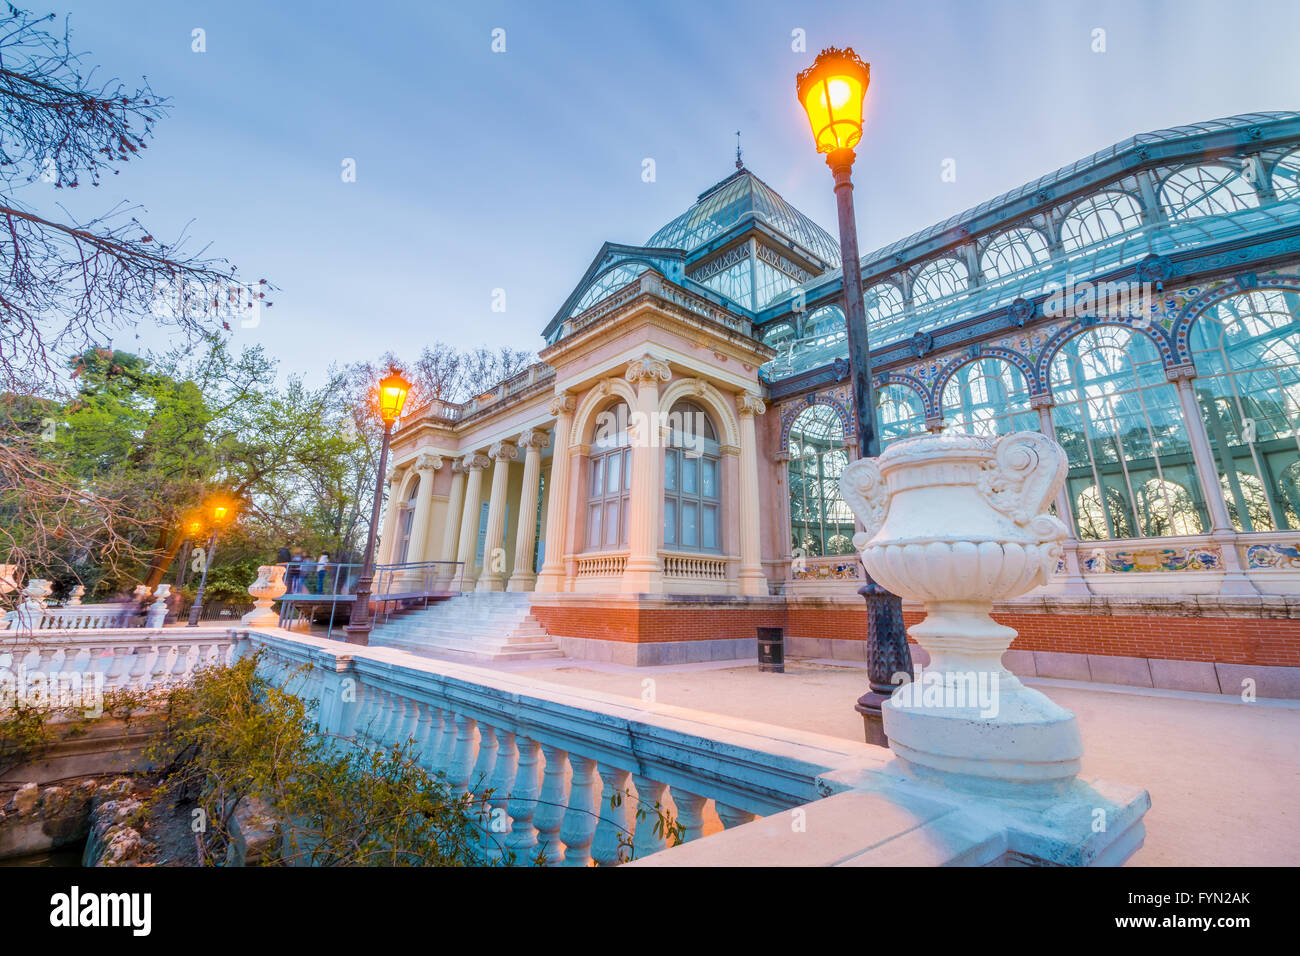 The Crystal Palace (Palacio de Cristal) is located in the Retiro park in Madrid, Spain. It is a metal structure used for exposit Stock Photo